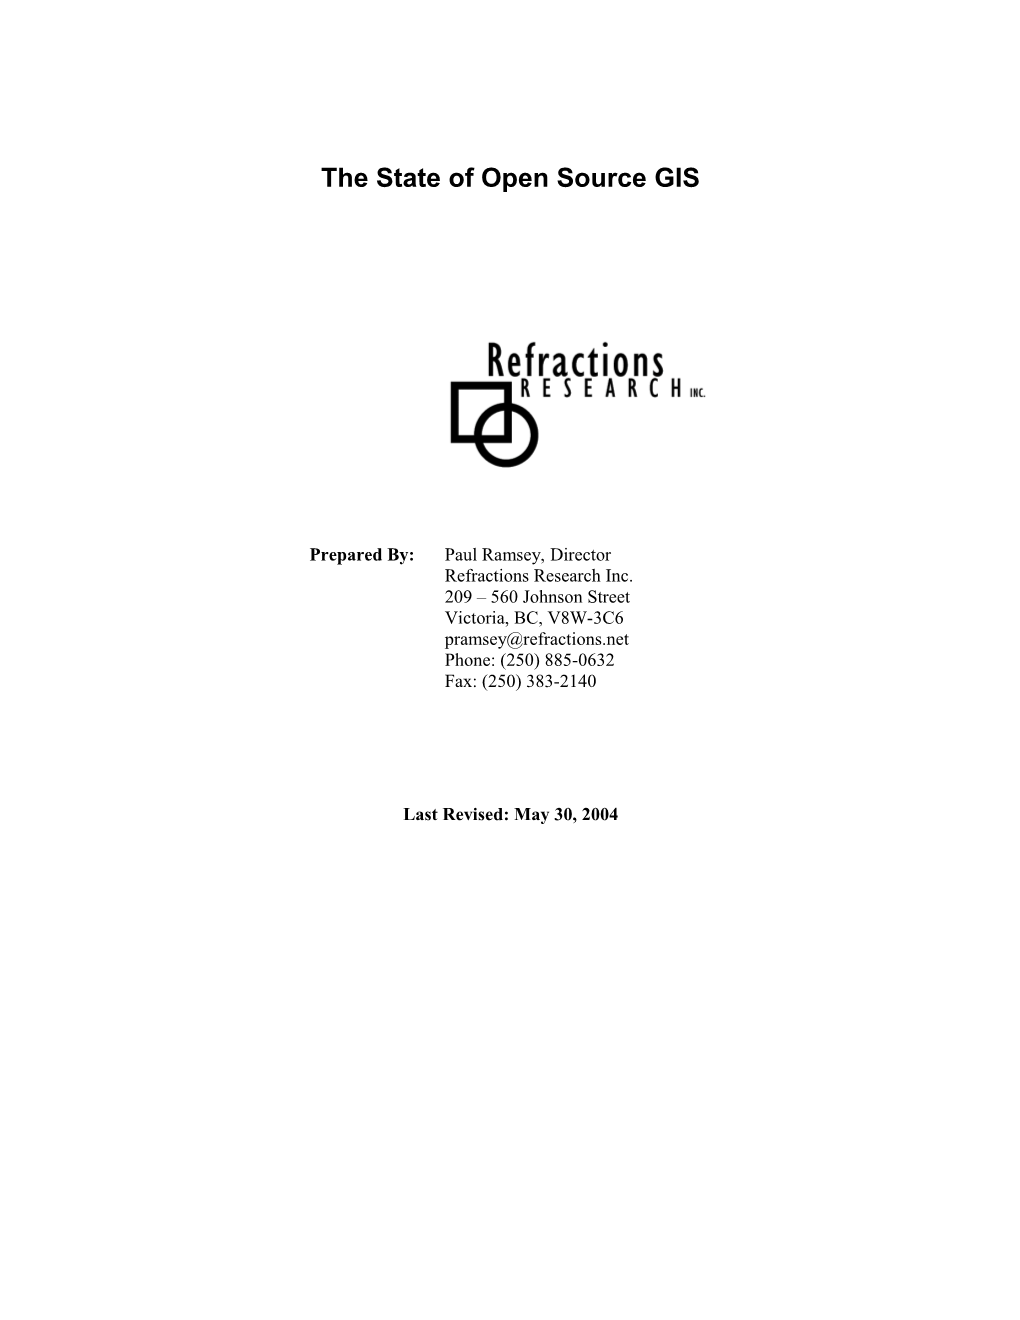 The State of Open Source GIS